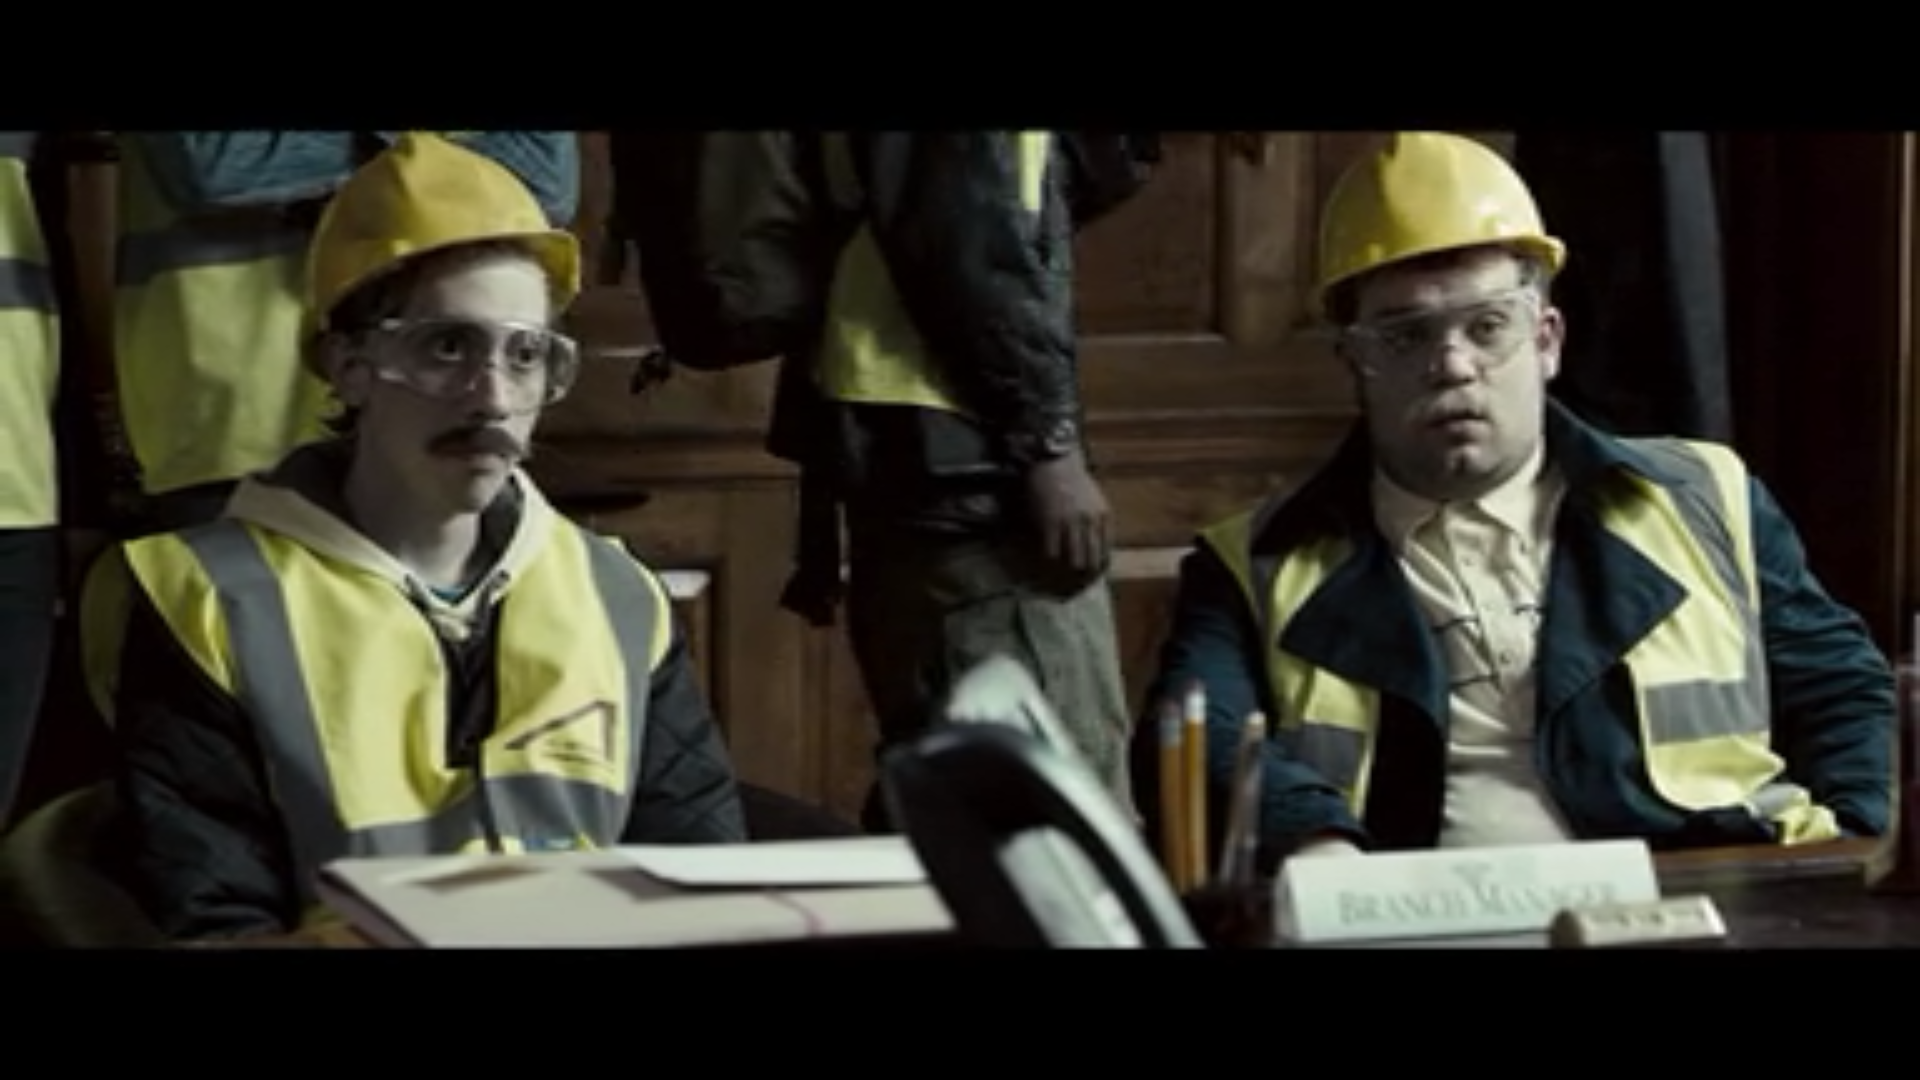 two men in construction crew uniforms wear fake mustaches